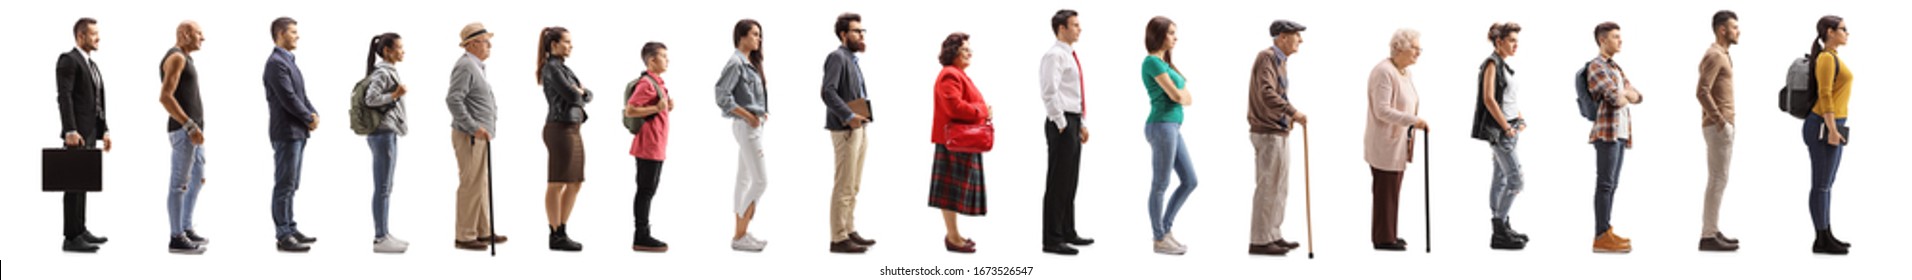 Full length profile shot of many young and older people waiting in line isolated on white background